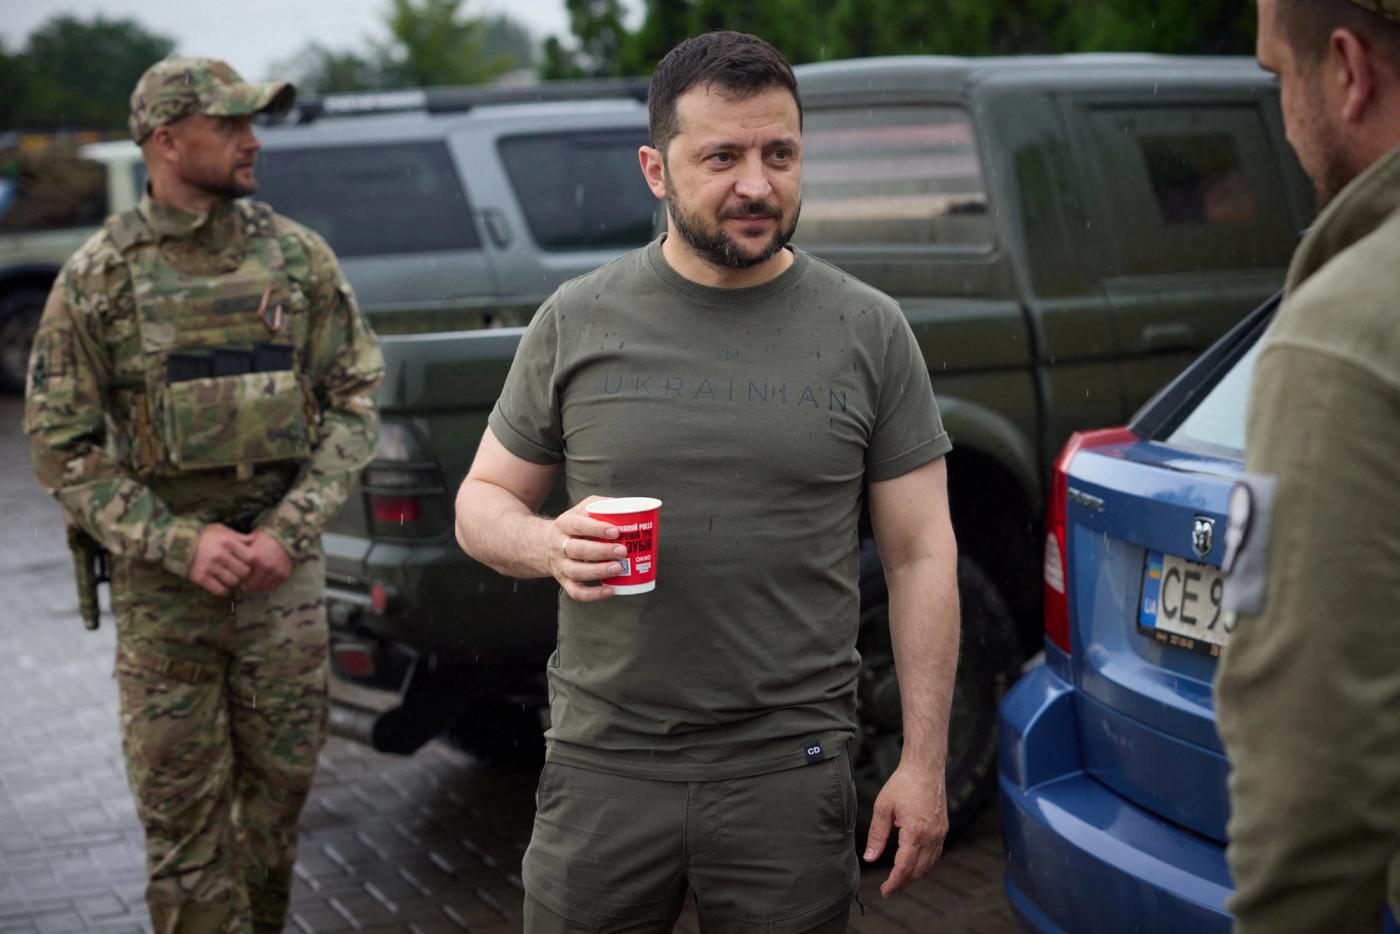 Ukraine's President Volodymyr Zelenskiy drinks coffee at a petrol station after visiting positions near the front line.